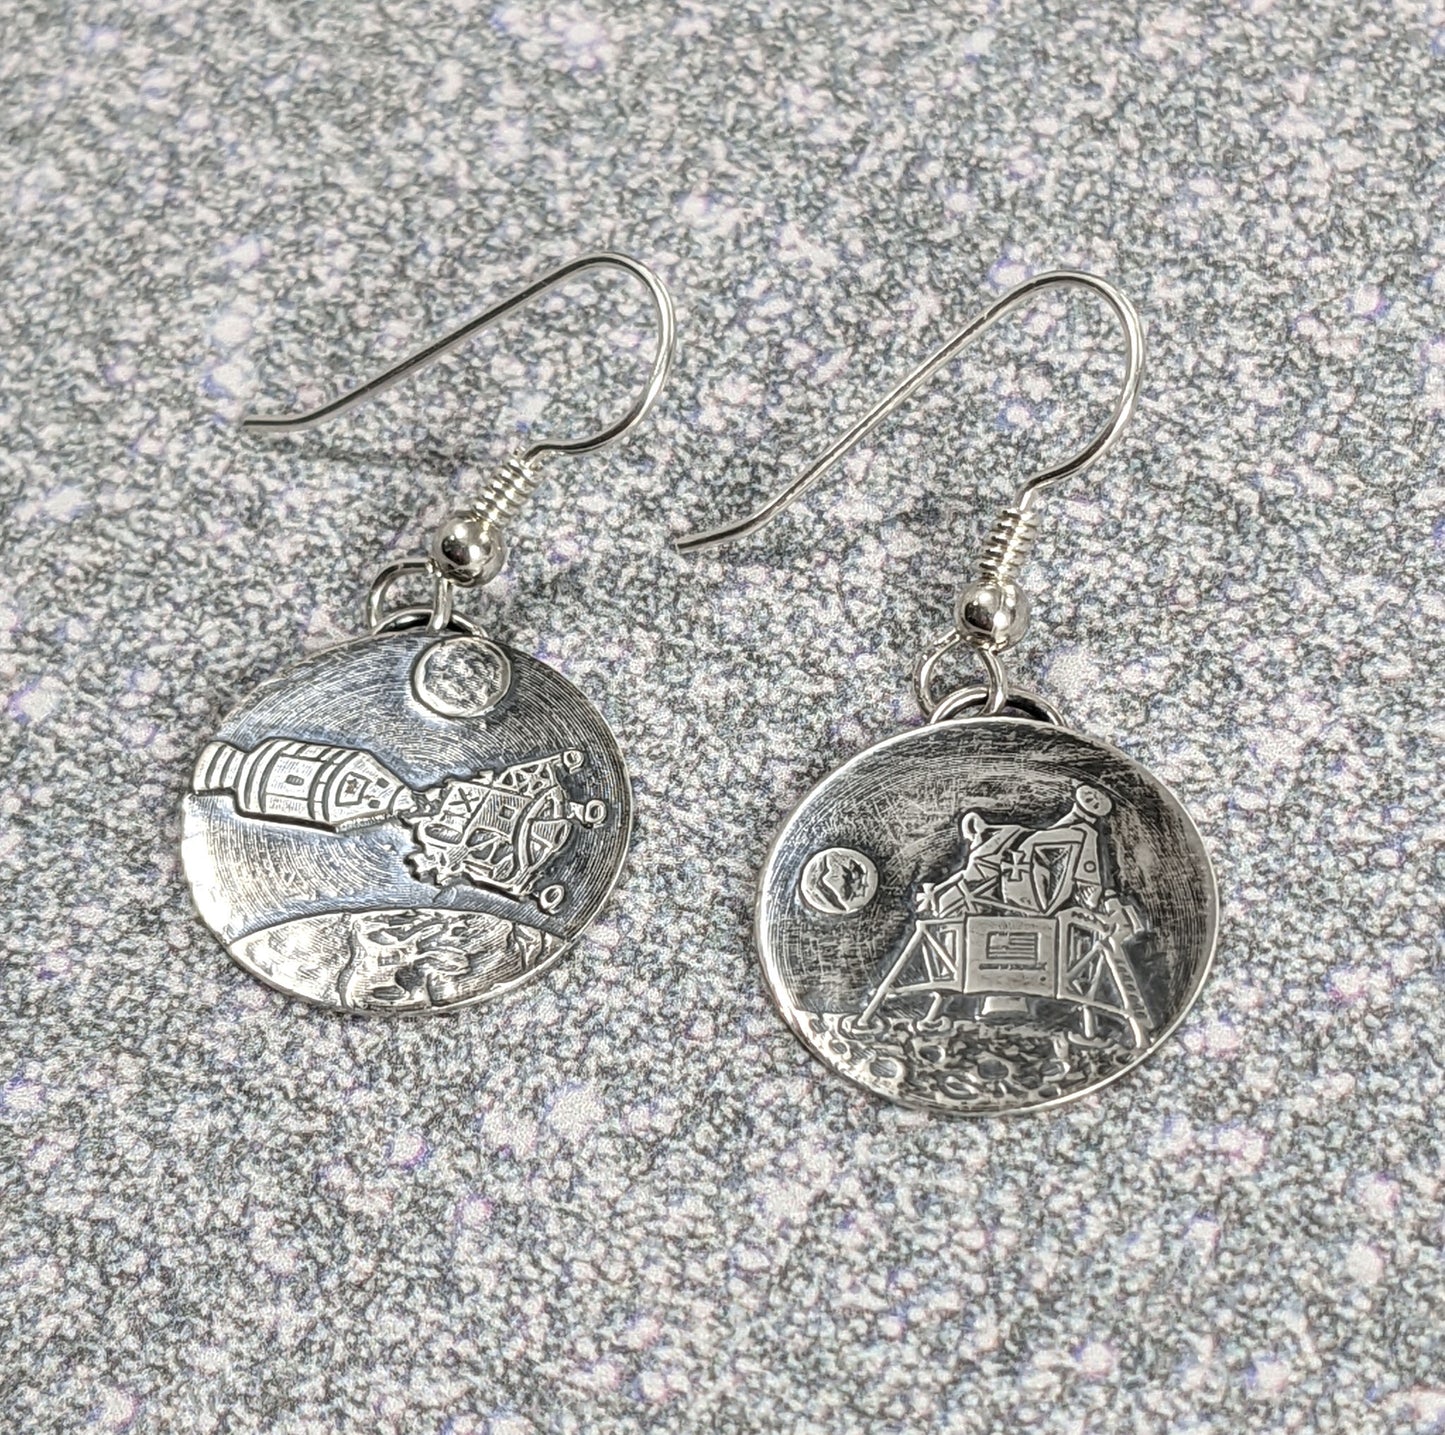 Handmade Sterling silver earrings depicting the Apollo 11 moon landing of the Eagle lunar module. One earring shows Eagle on the moon, the other shows eagle docking with the other module